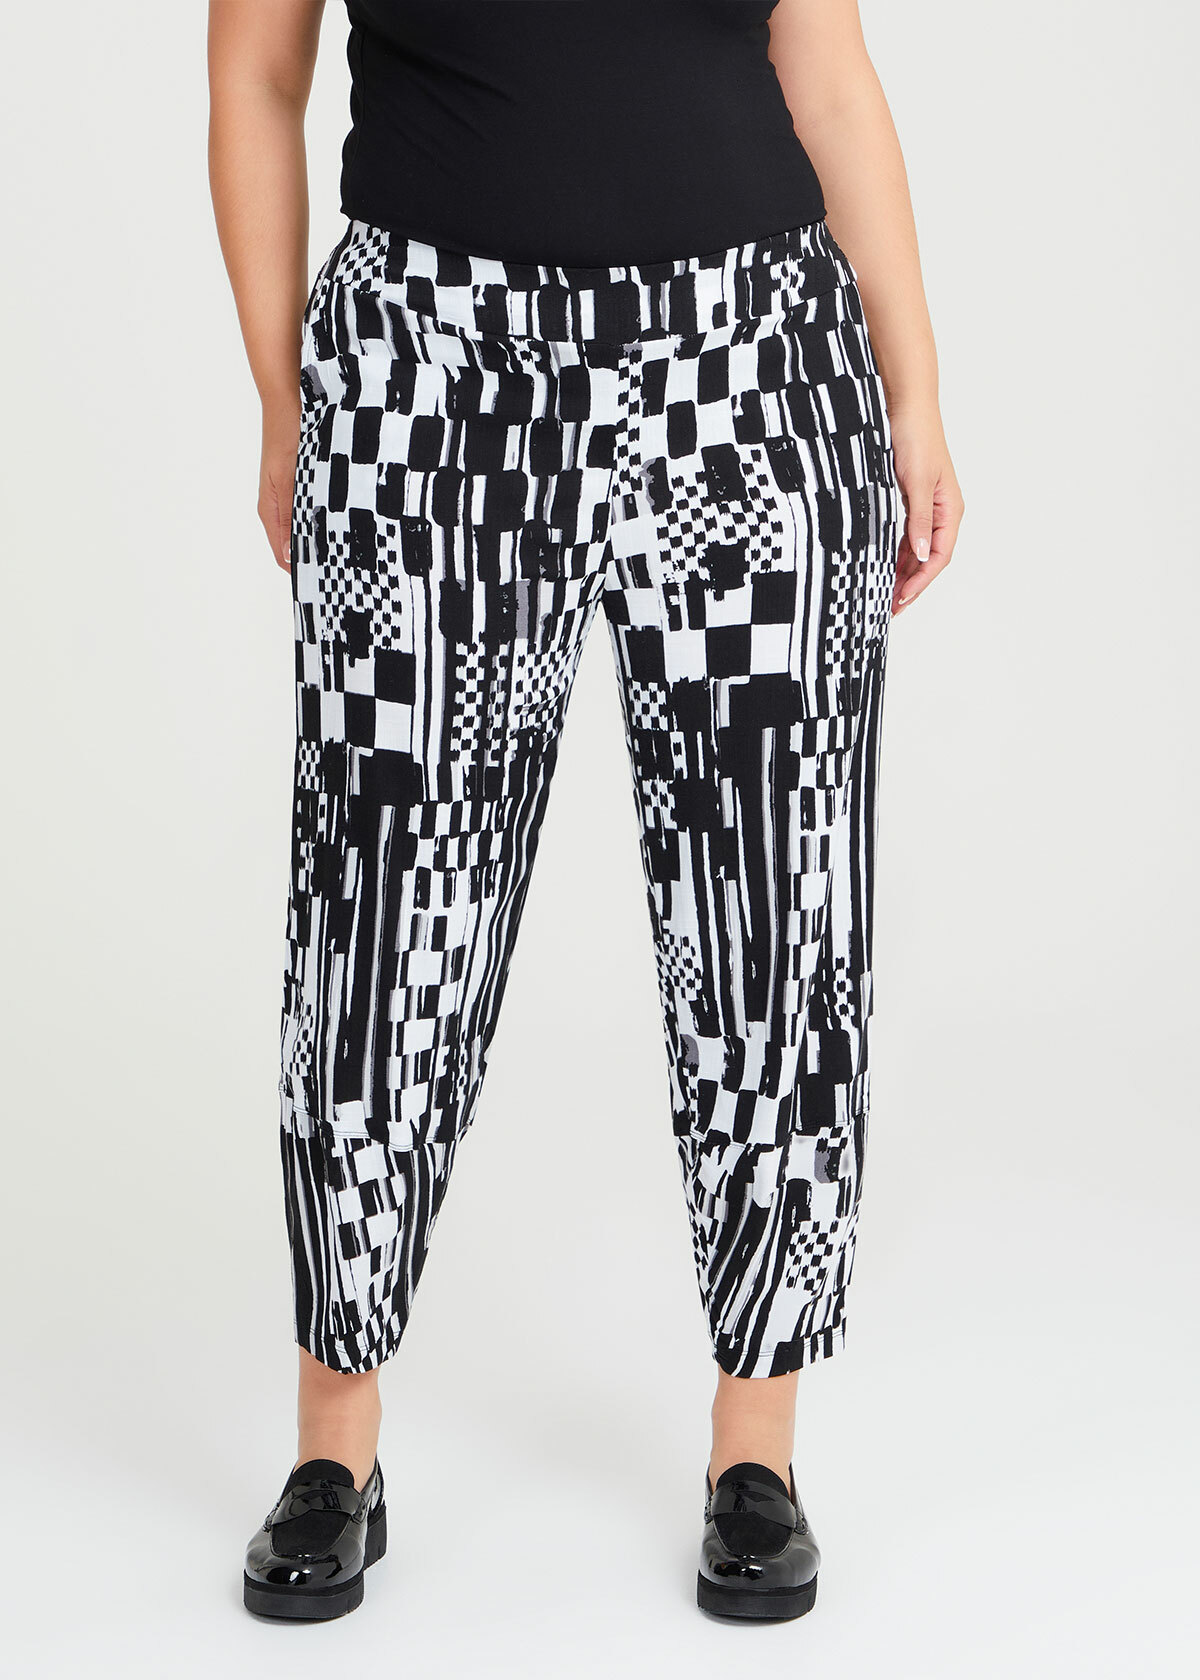 Shop Plus Size Check Me Out Natural Pant in Black | Sizes 12-30 ...